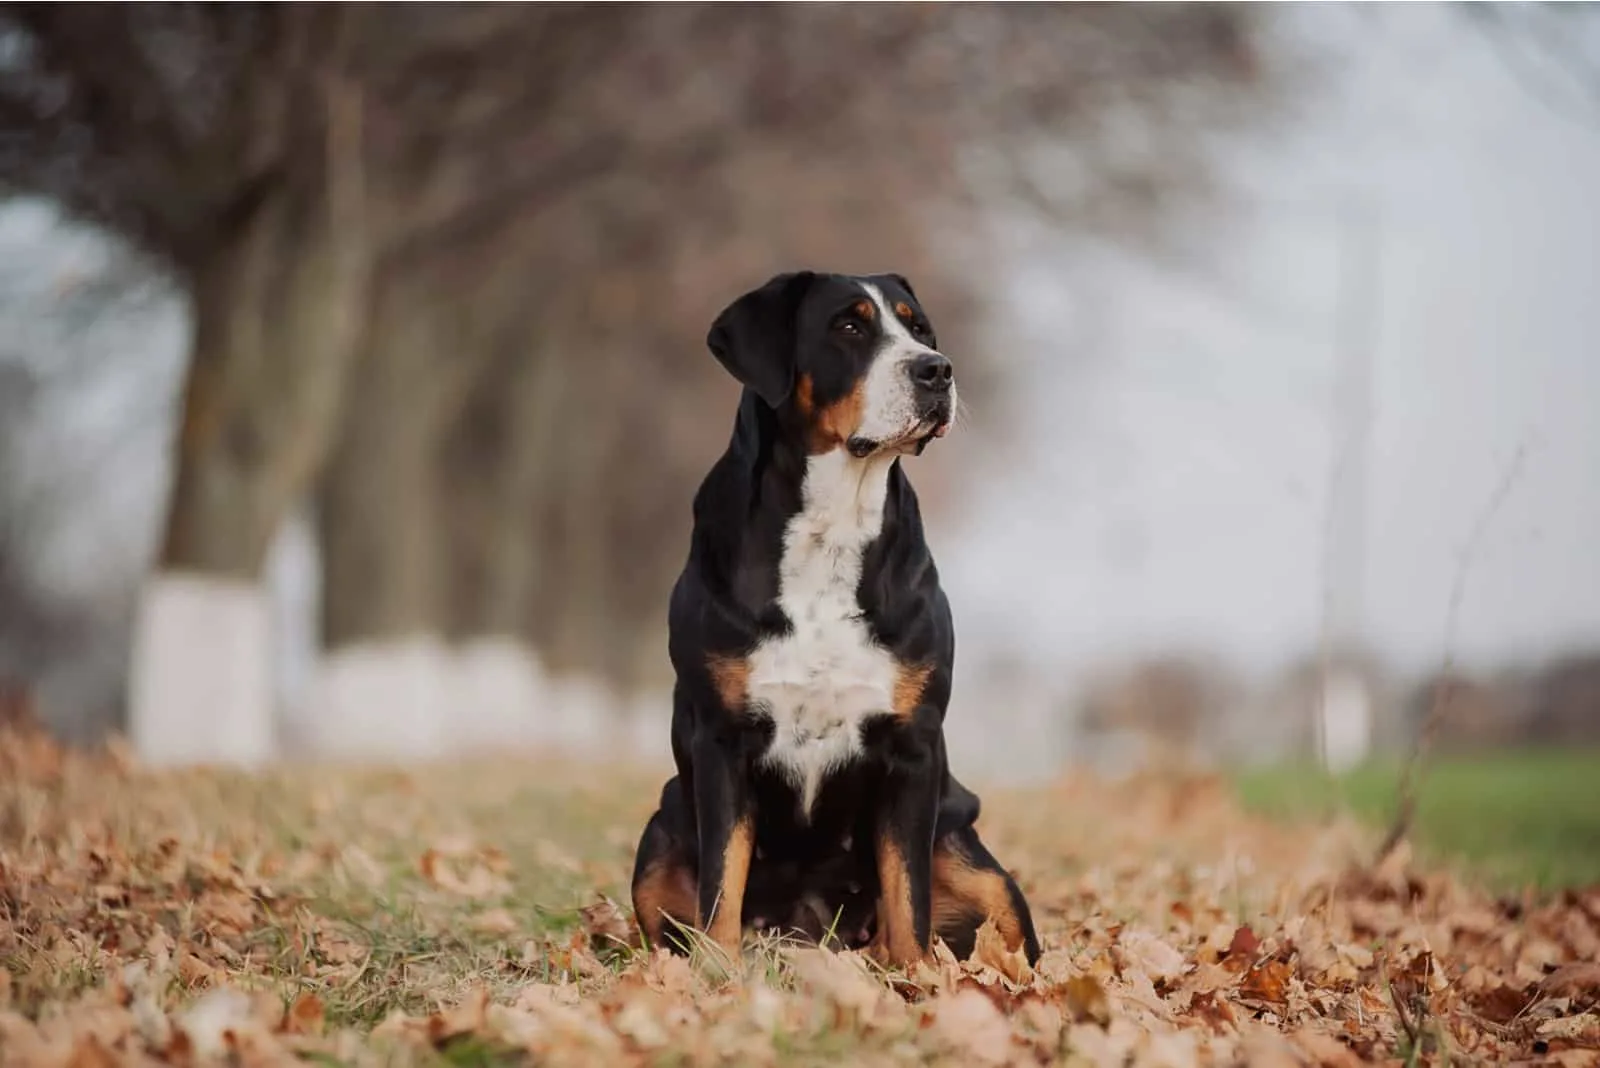 Greater Swiss Mountain Dog sitting on autumn leaves